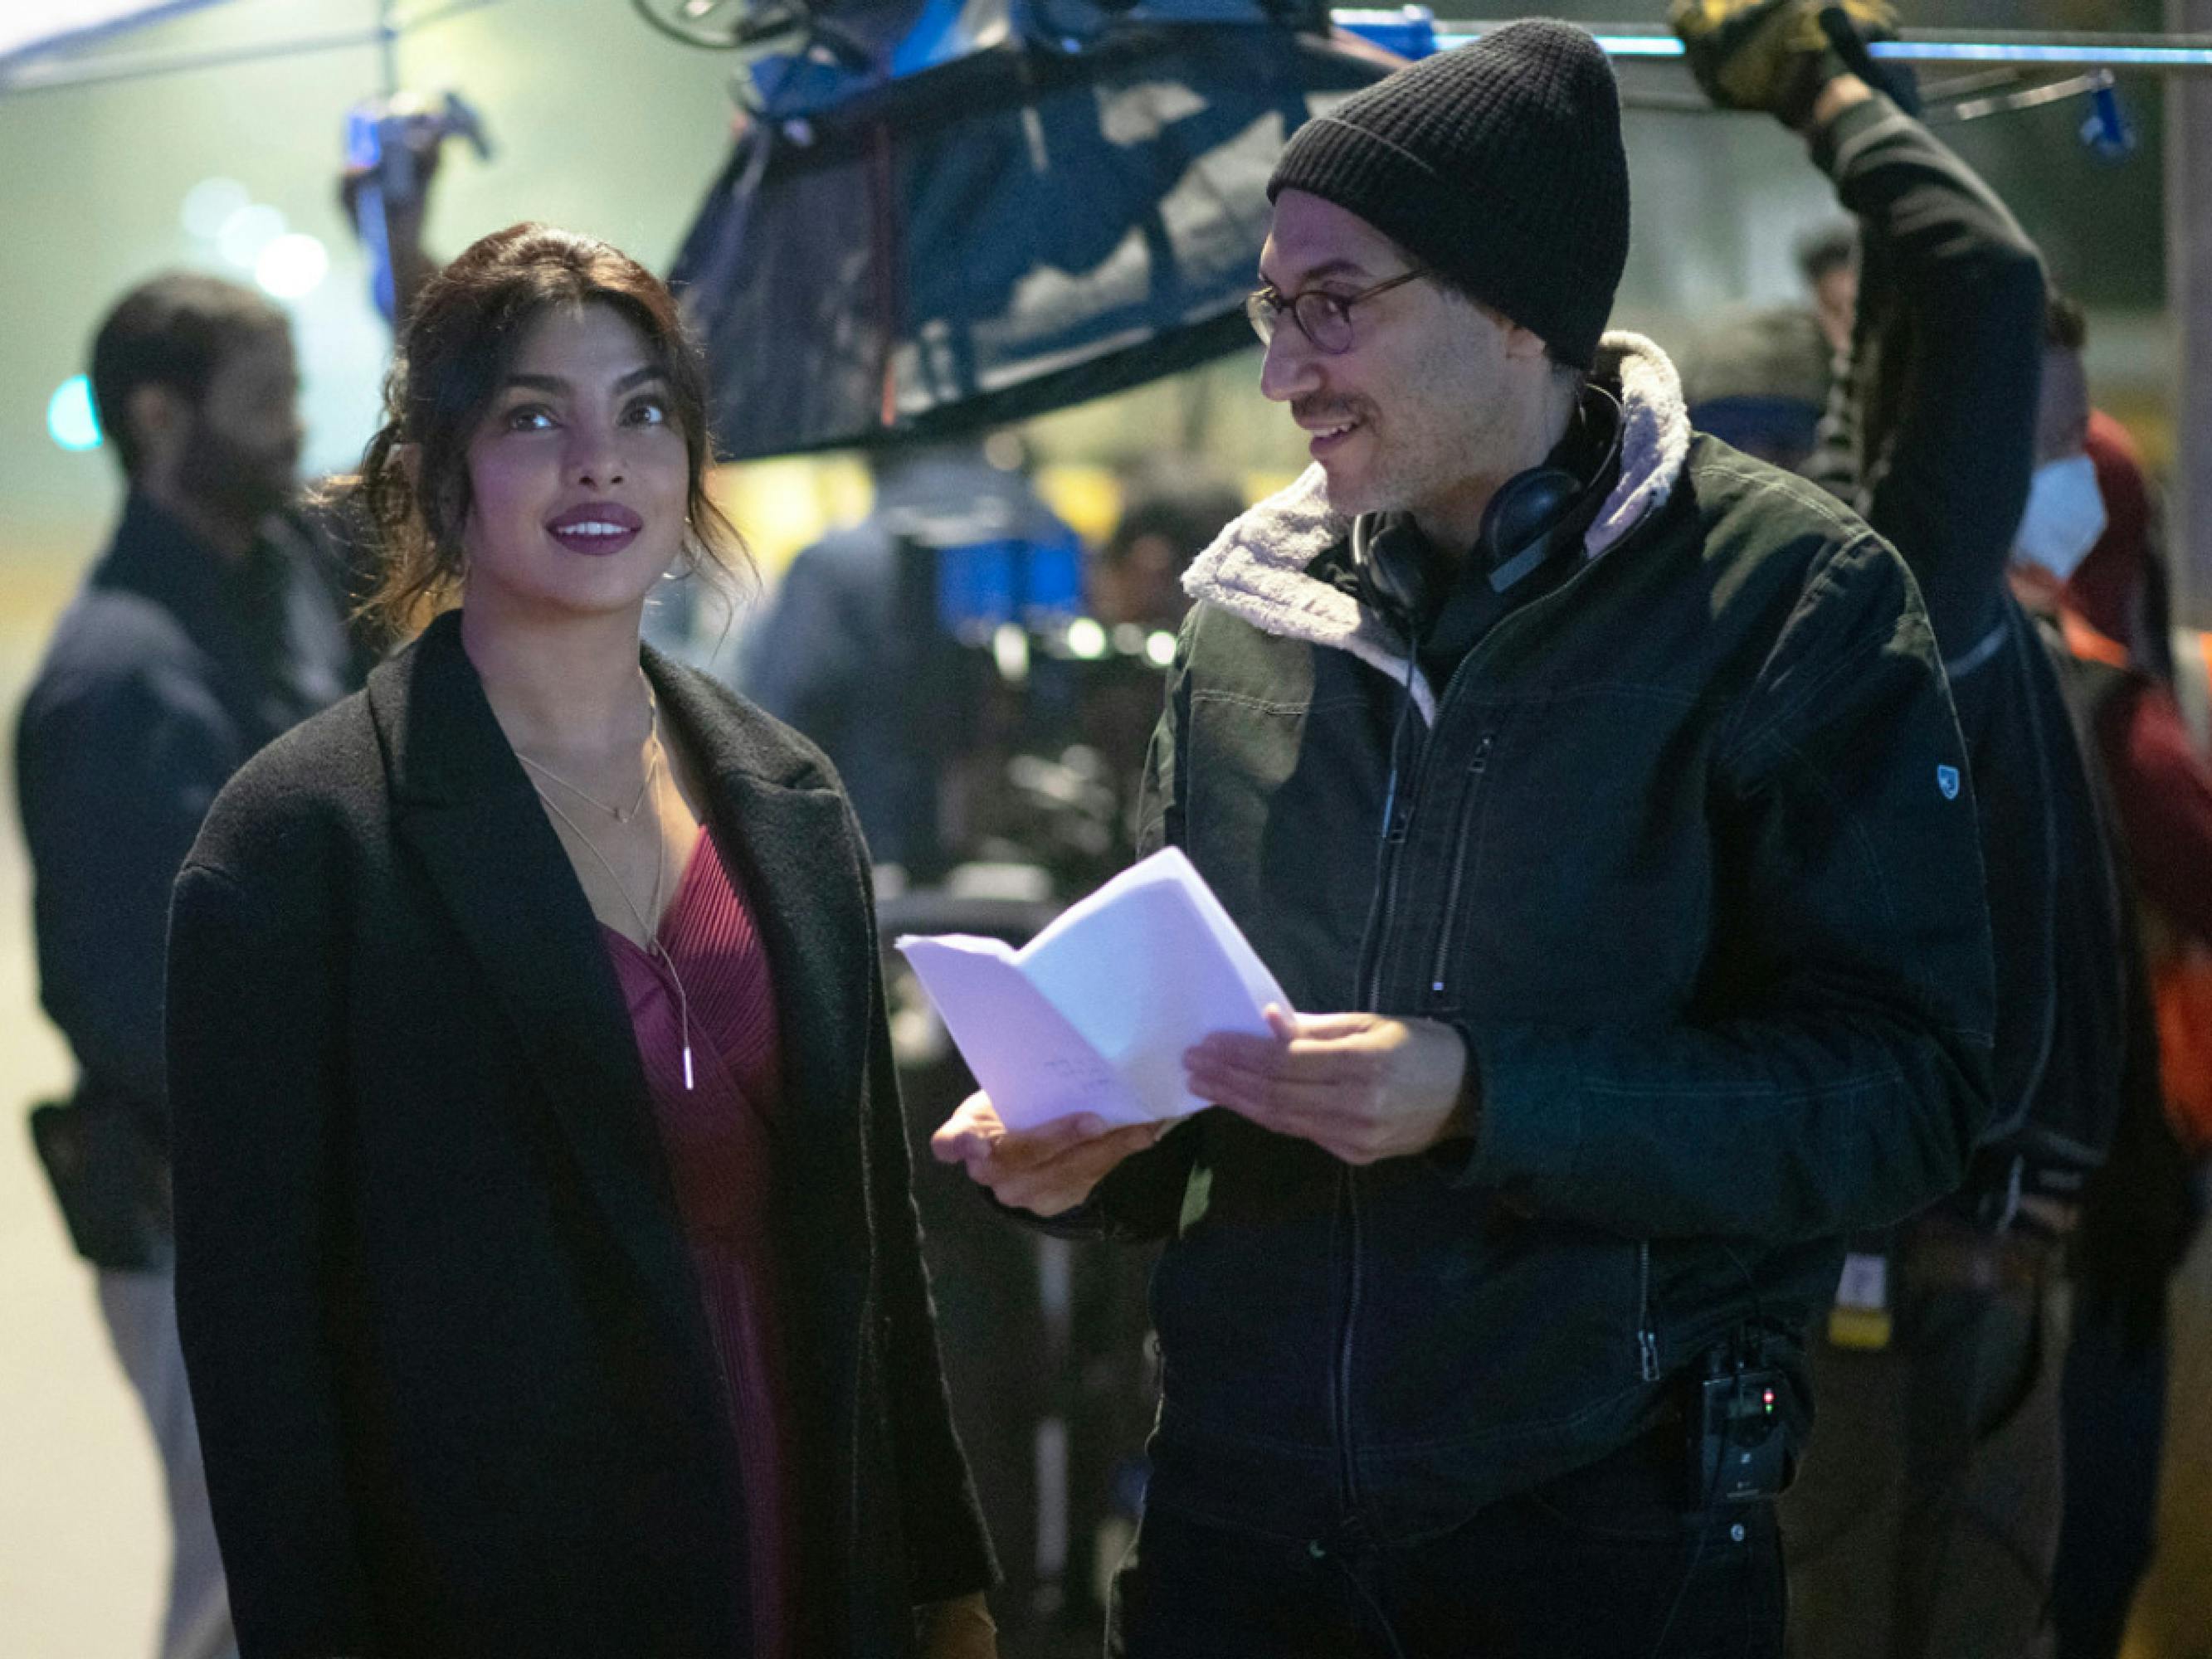 Priyanka Chopra Jonas is seen with director Ramin Bahrani in a behind the scenes photo. In the background, the crew are moving lighting equipment. It looks like it’s nighttime and they are outside. Bahrani is holding some papers, potentially script pages. Both are smiling.